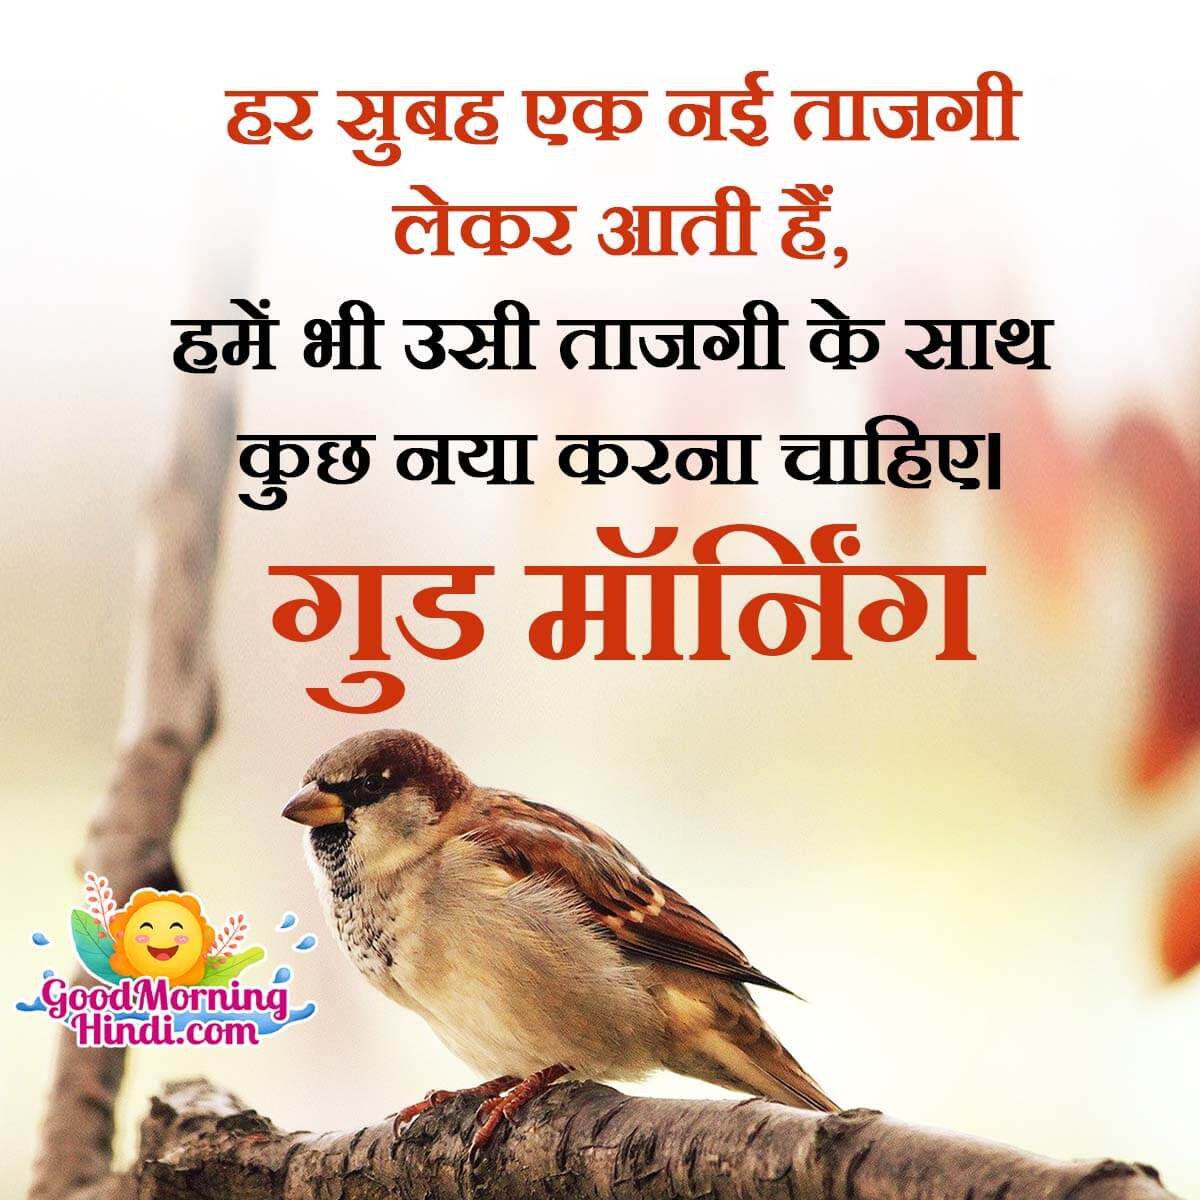 Inspirational Good Morning Messages In Hindi - Good Morning Wishes ...